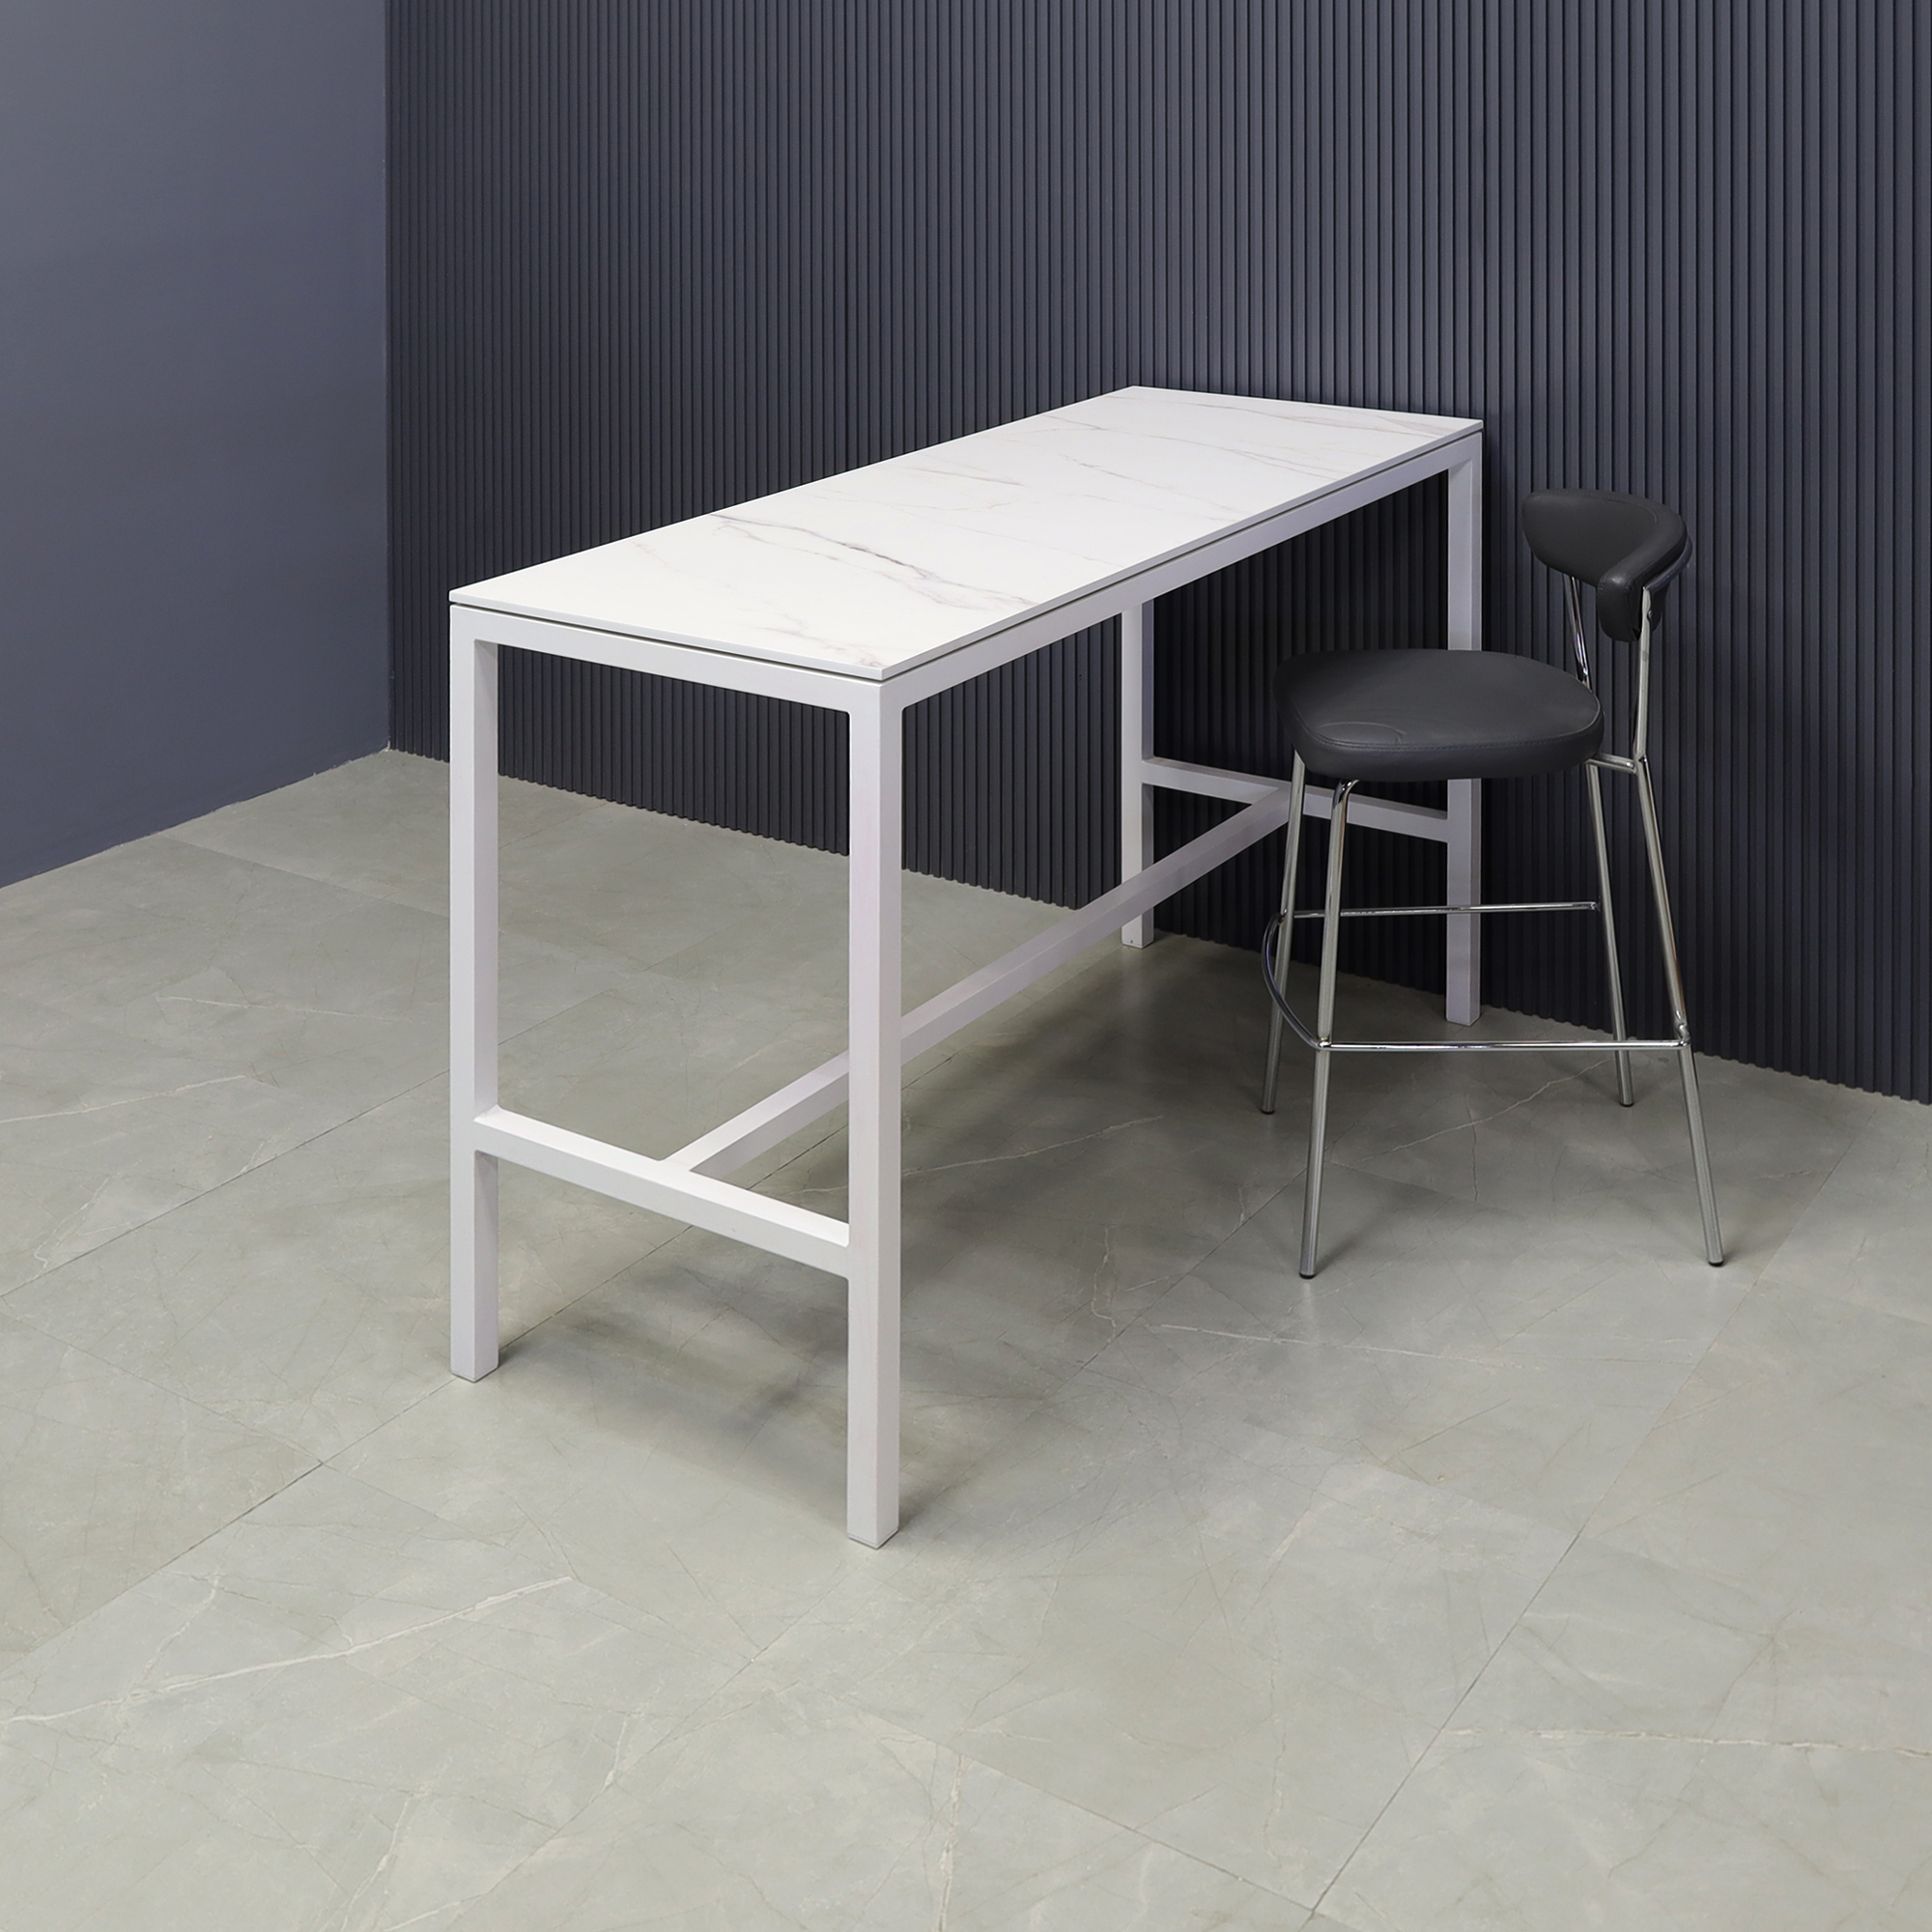 Aspen Engineered Stone Bar Table in solenne marble top and white aluminum frame shown here.